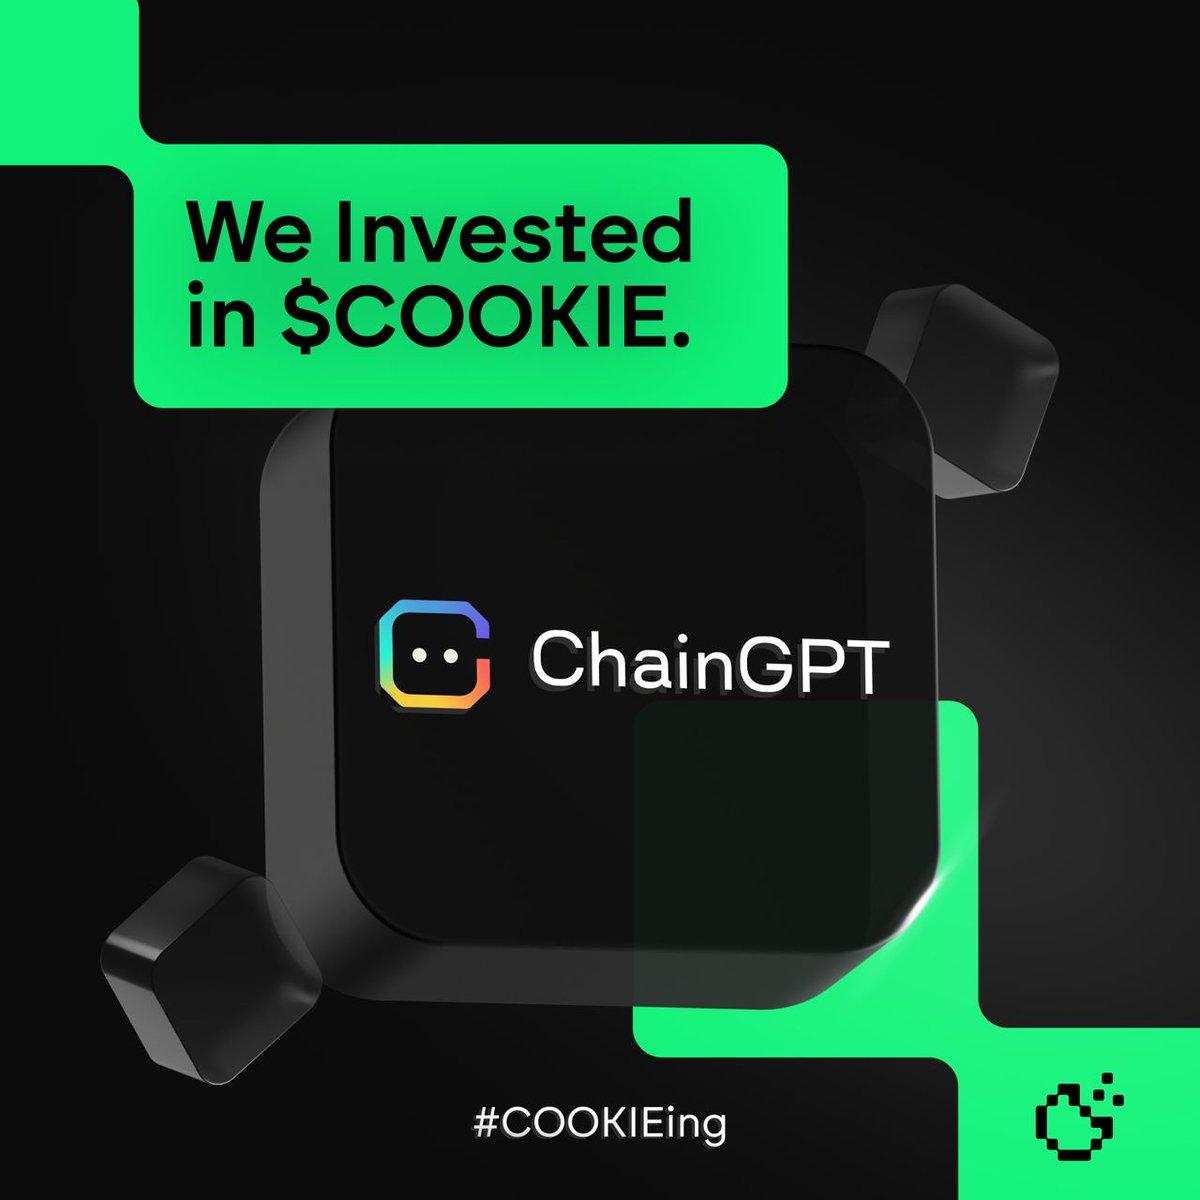 We're excited to announce our investment in $COOKIE 🍪, powered by @Cookie3_com! 🎉

Supporting the largest MarketingFi & AI Data Layer in Web3:
🔹 300+ dApps using Cookie3 Analytics
🔹 18K+ KOLs with 400M+ followers
🔹 20 blockchains supported

Join us in #COOKIEing! 🚀